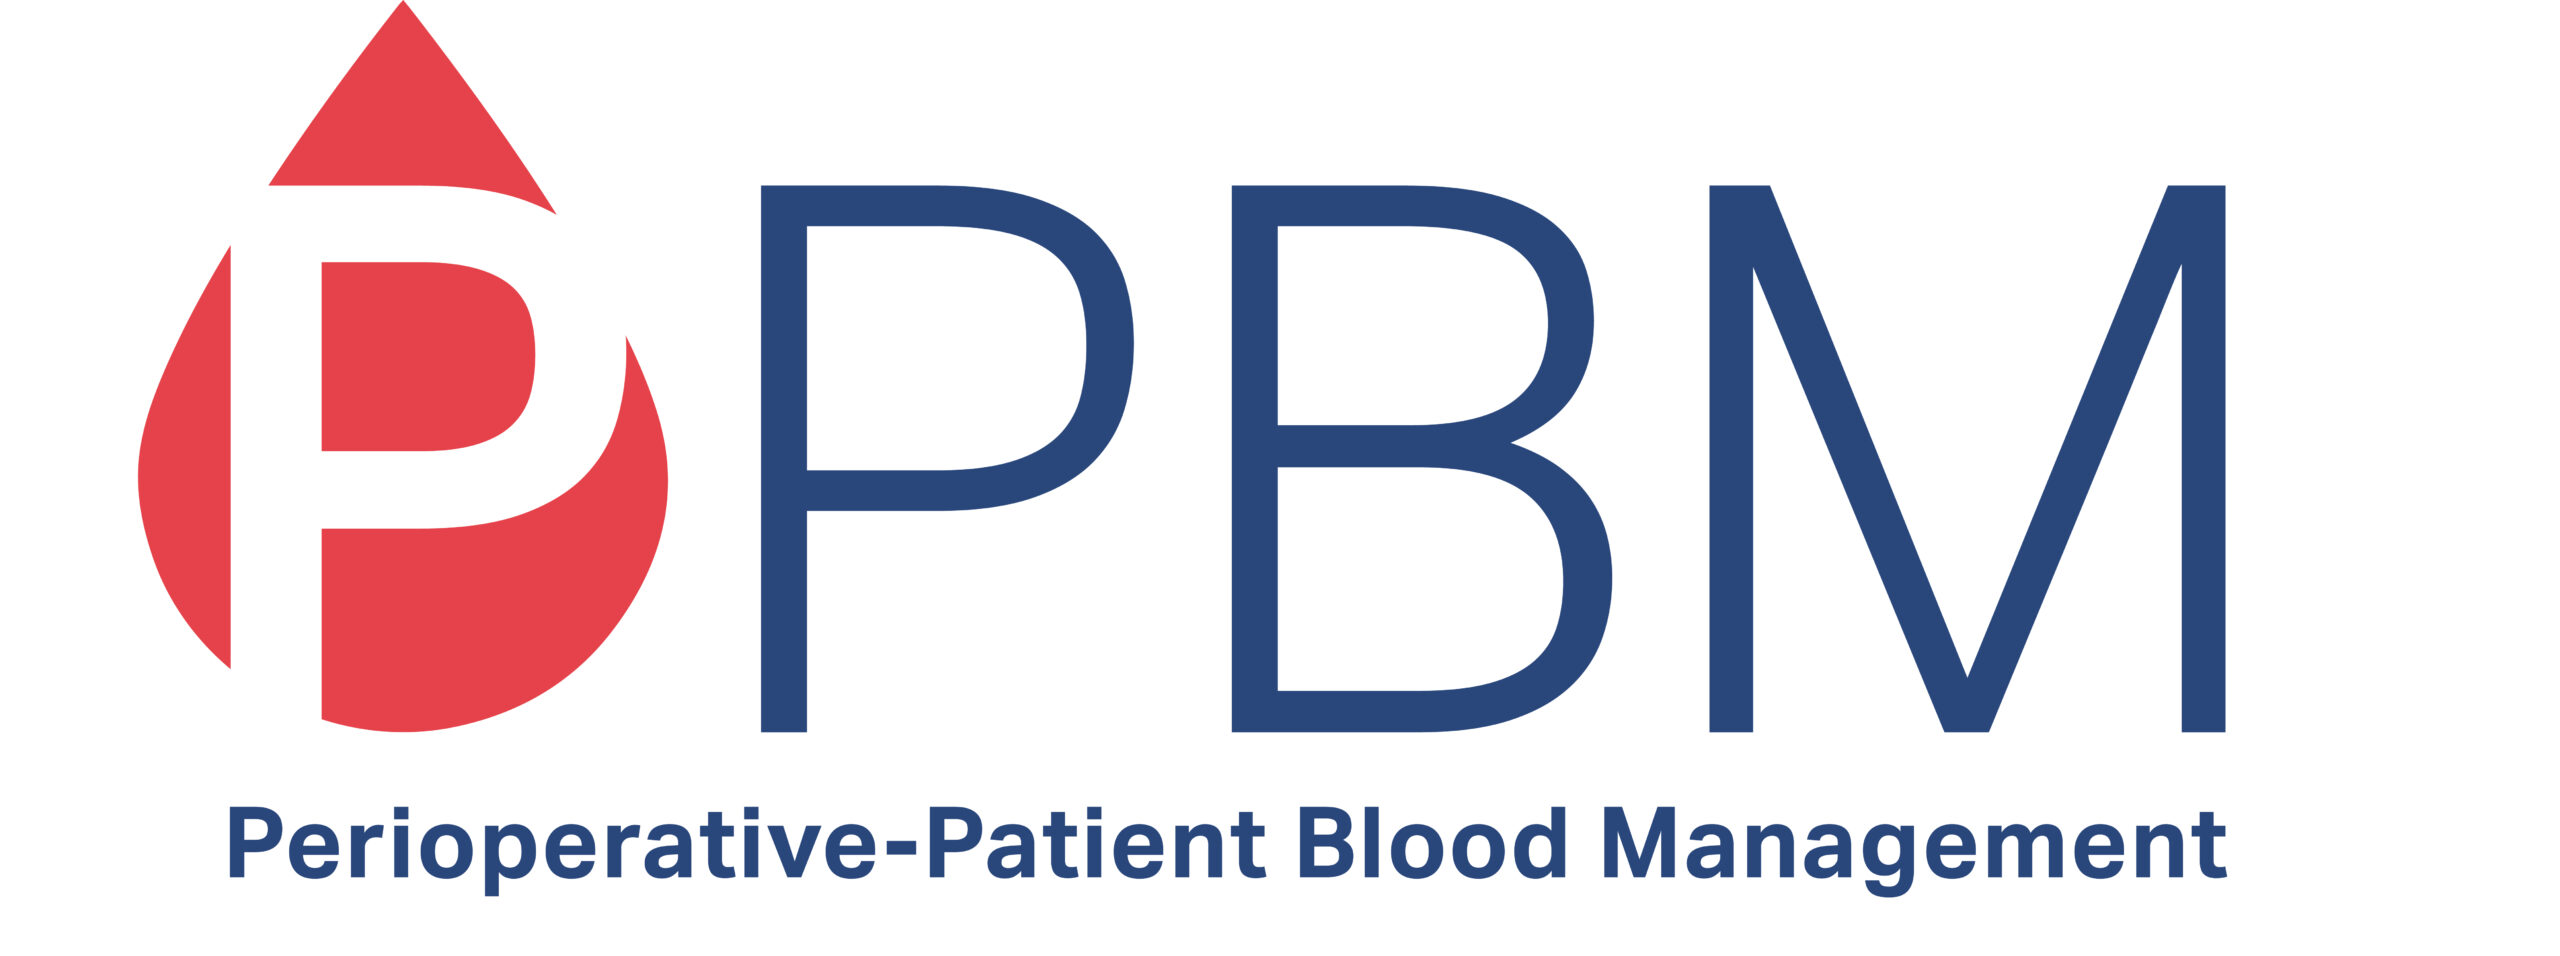 What is Patient Blood Management & why is it so important?